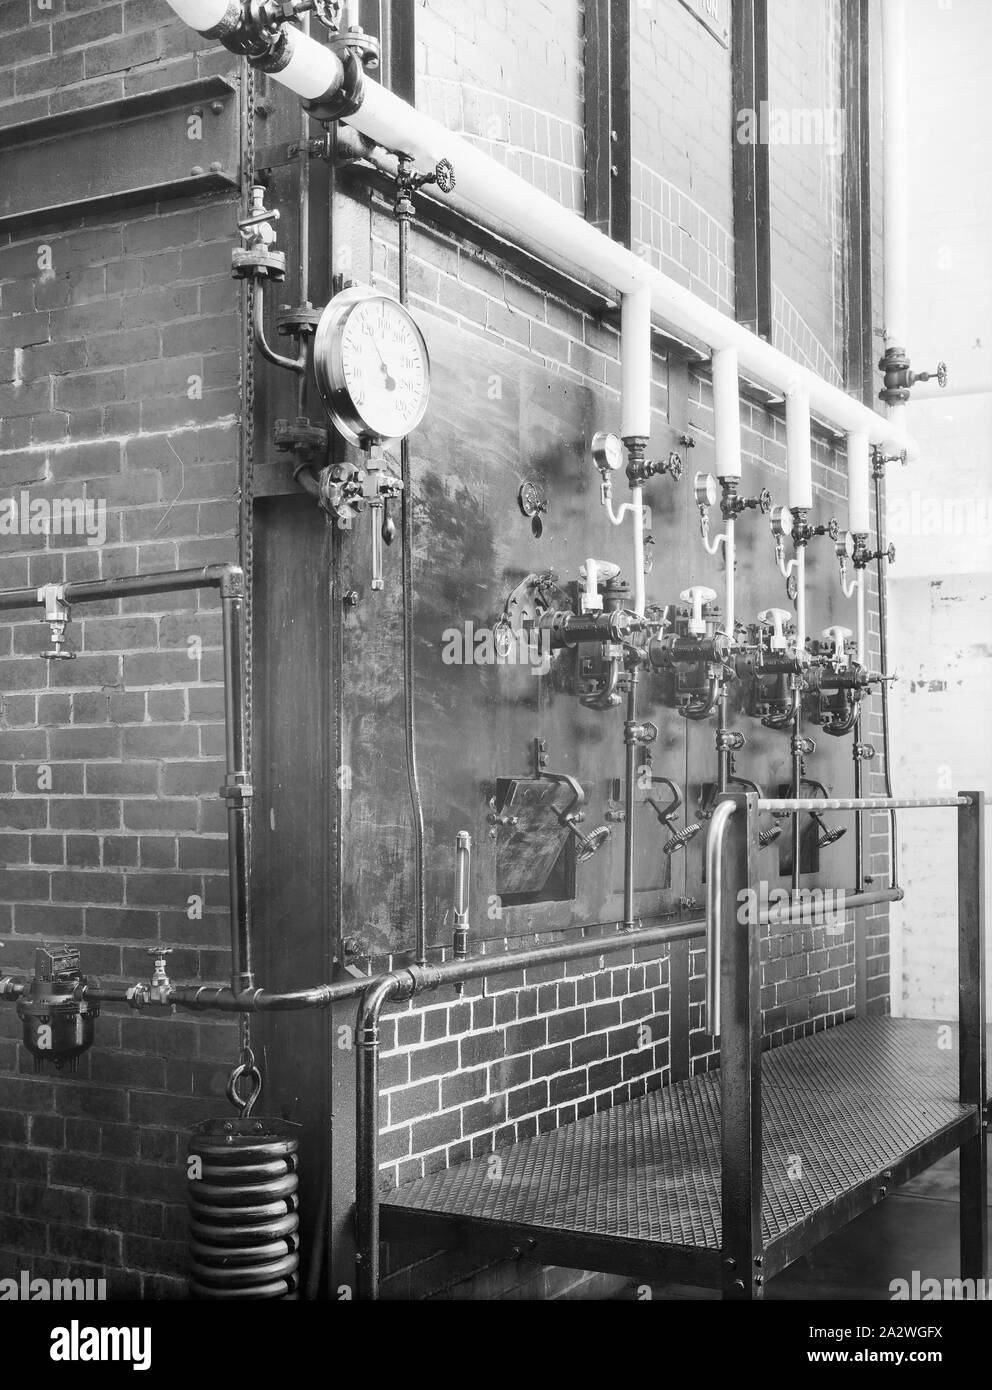 Negative, Boiler Room, Abbotsford Factory, pre-1949, Black and white ...